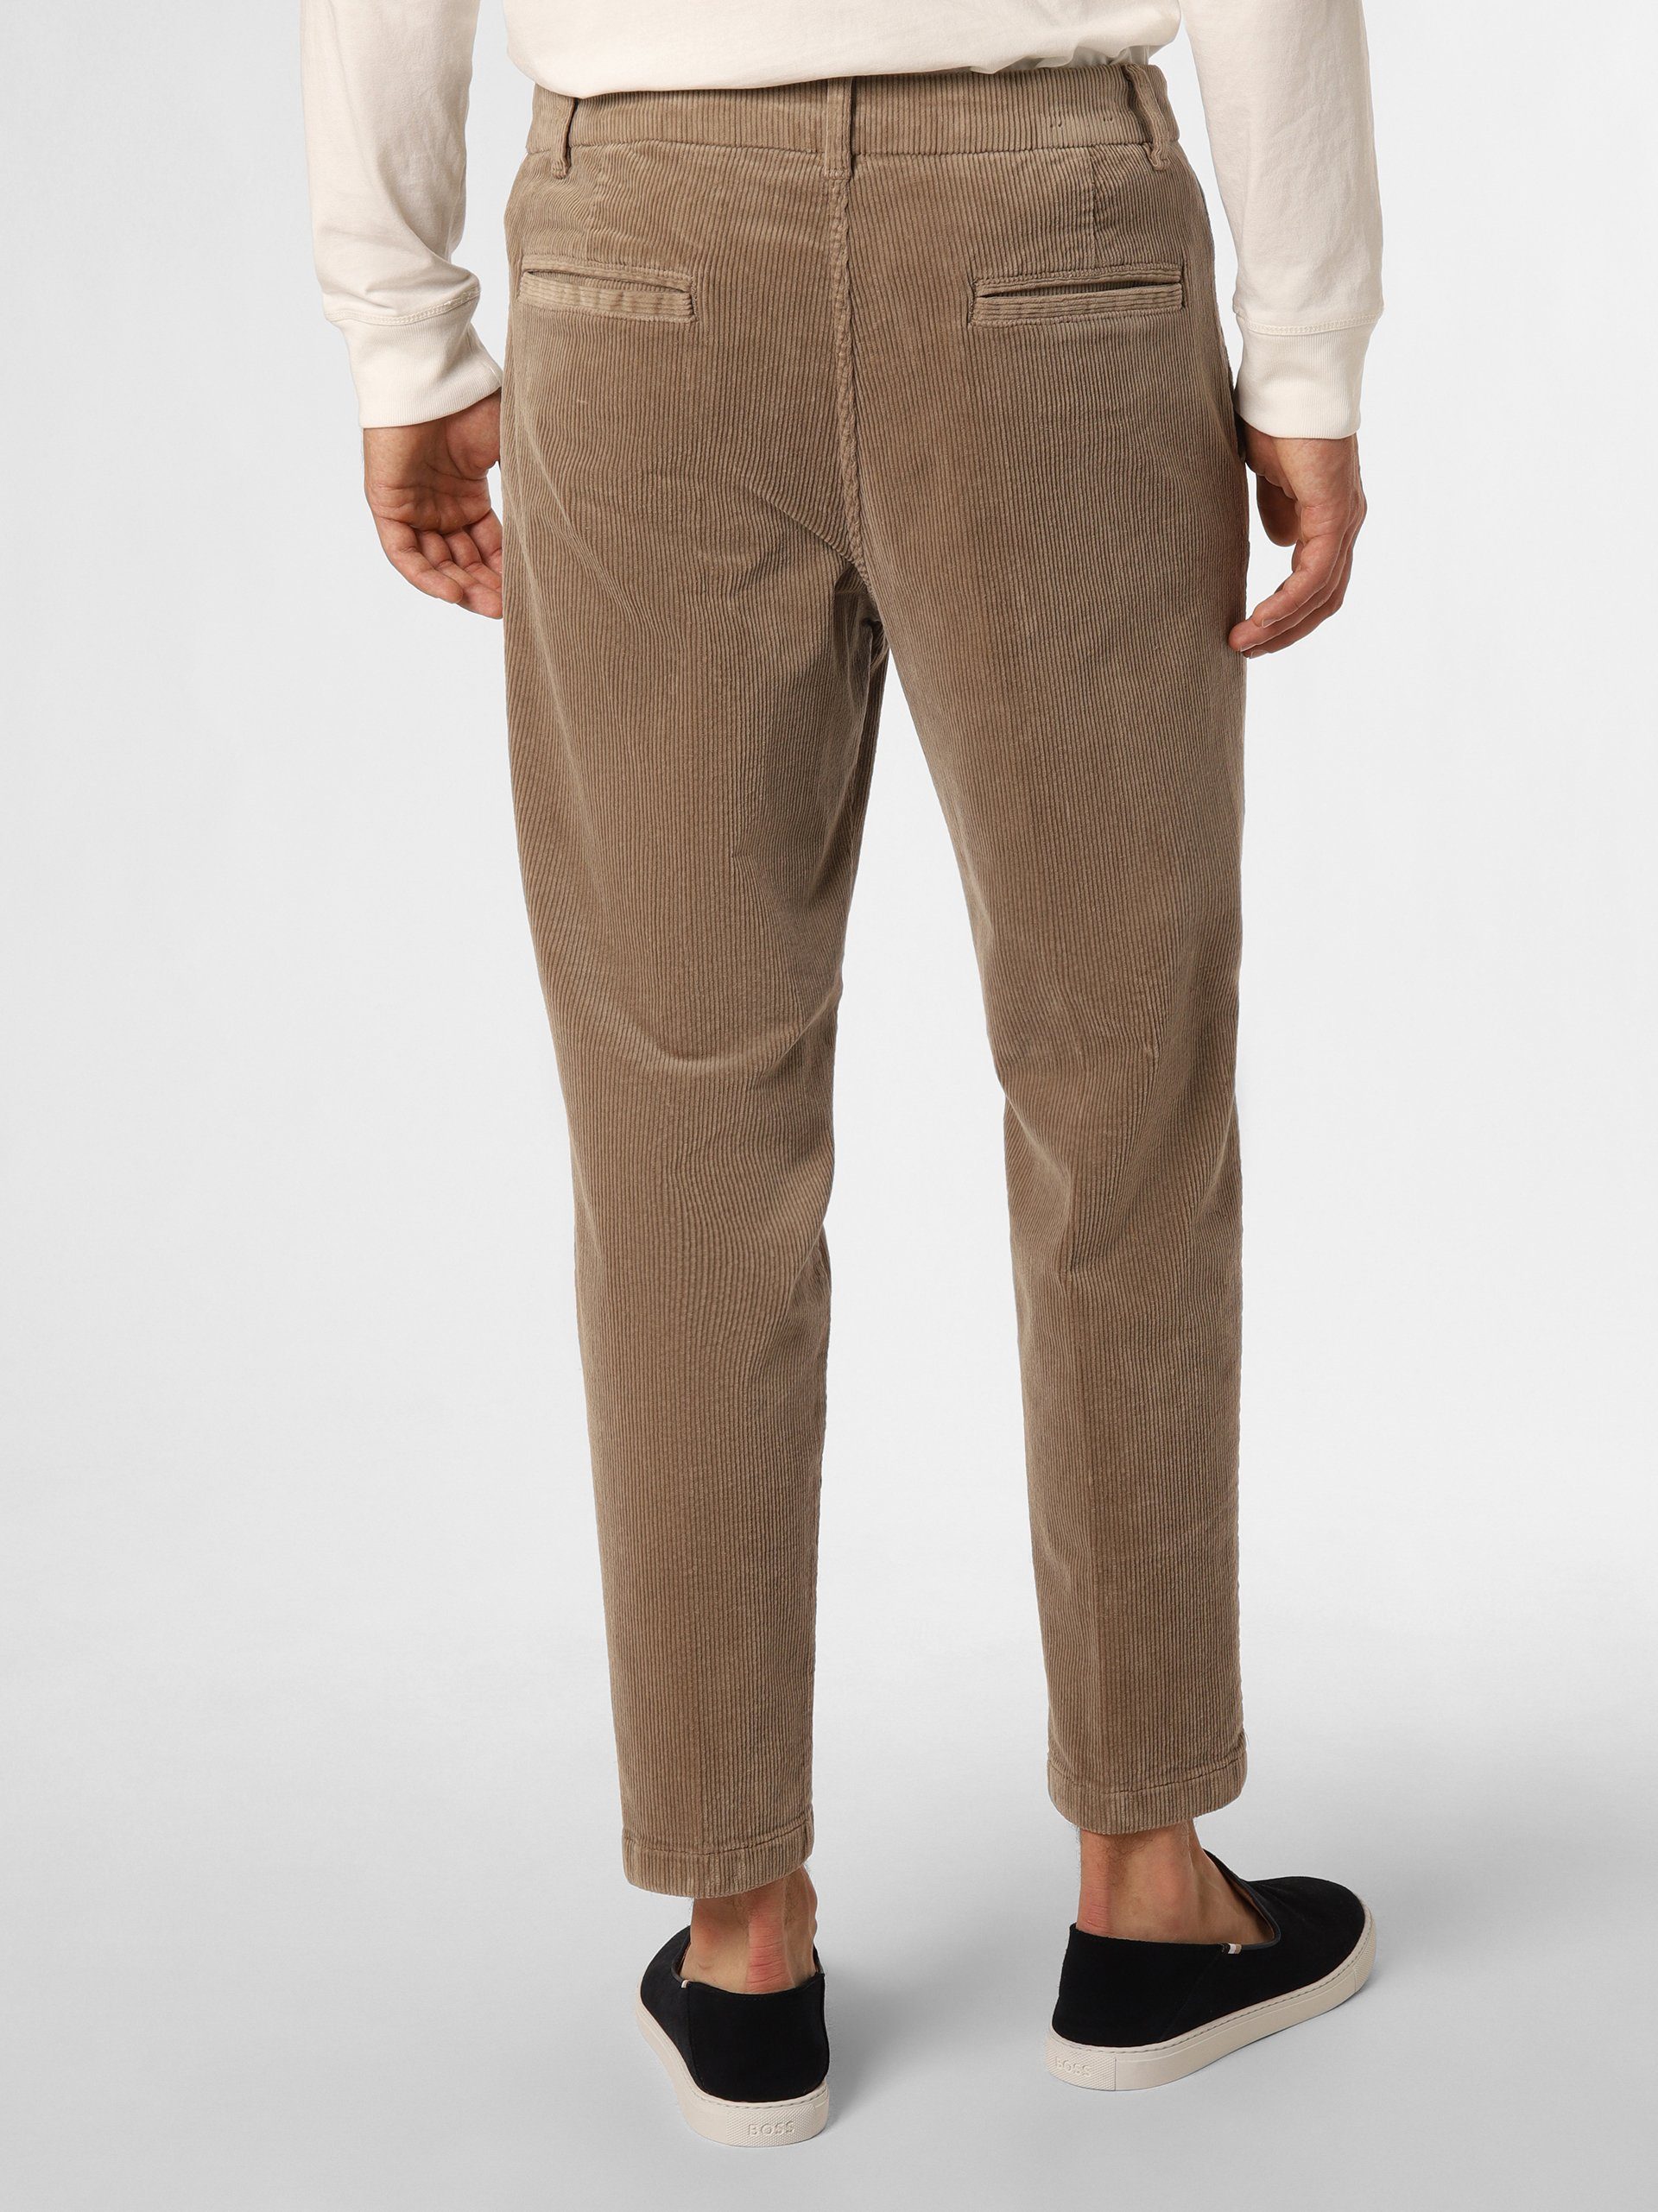 Aygill's Cordhose Marco taupe